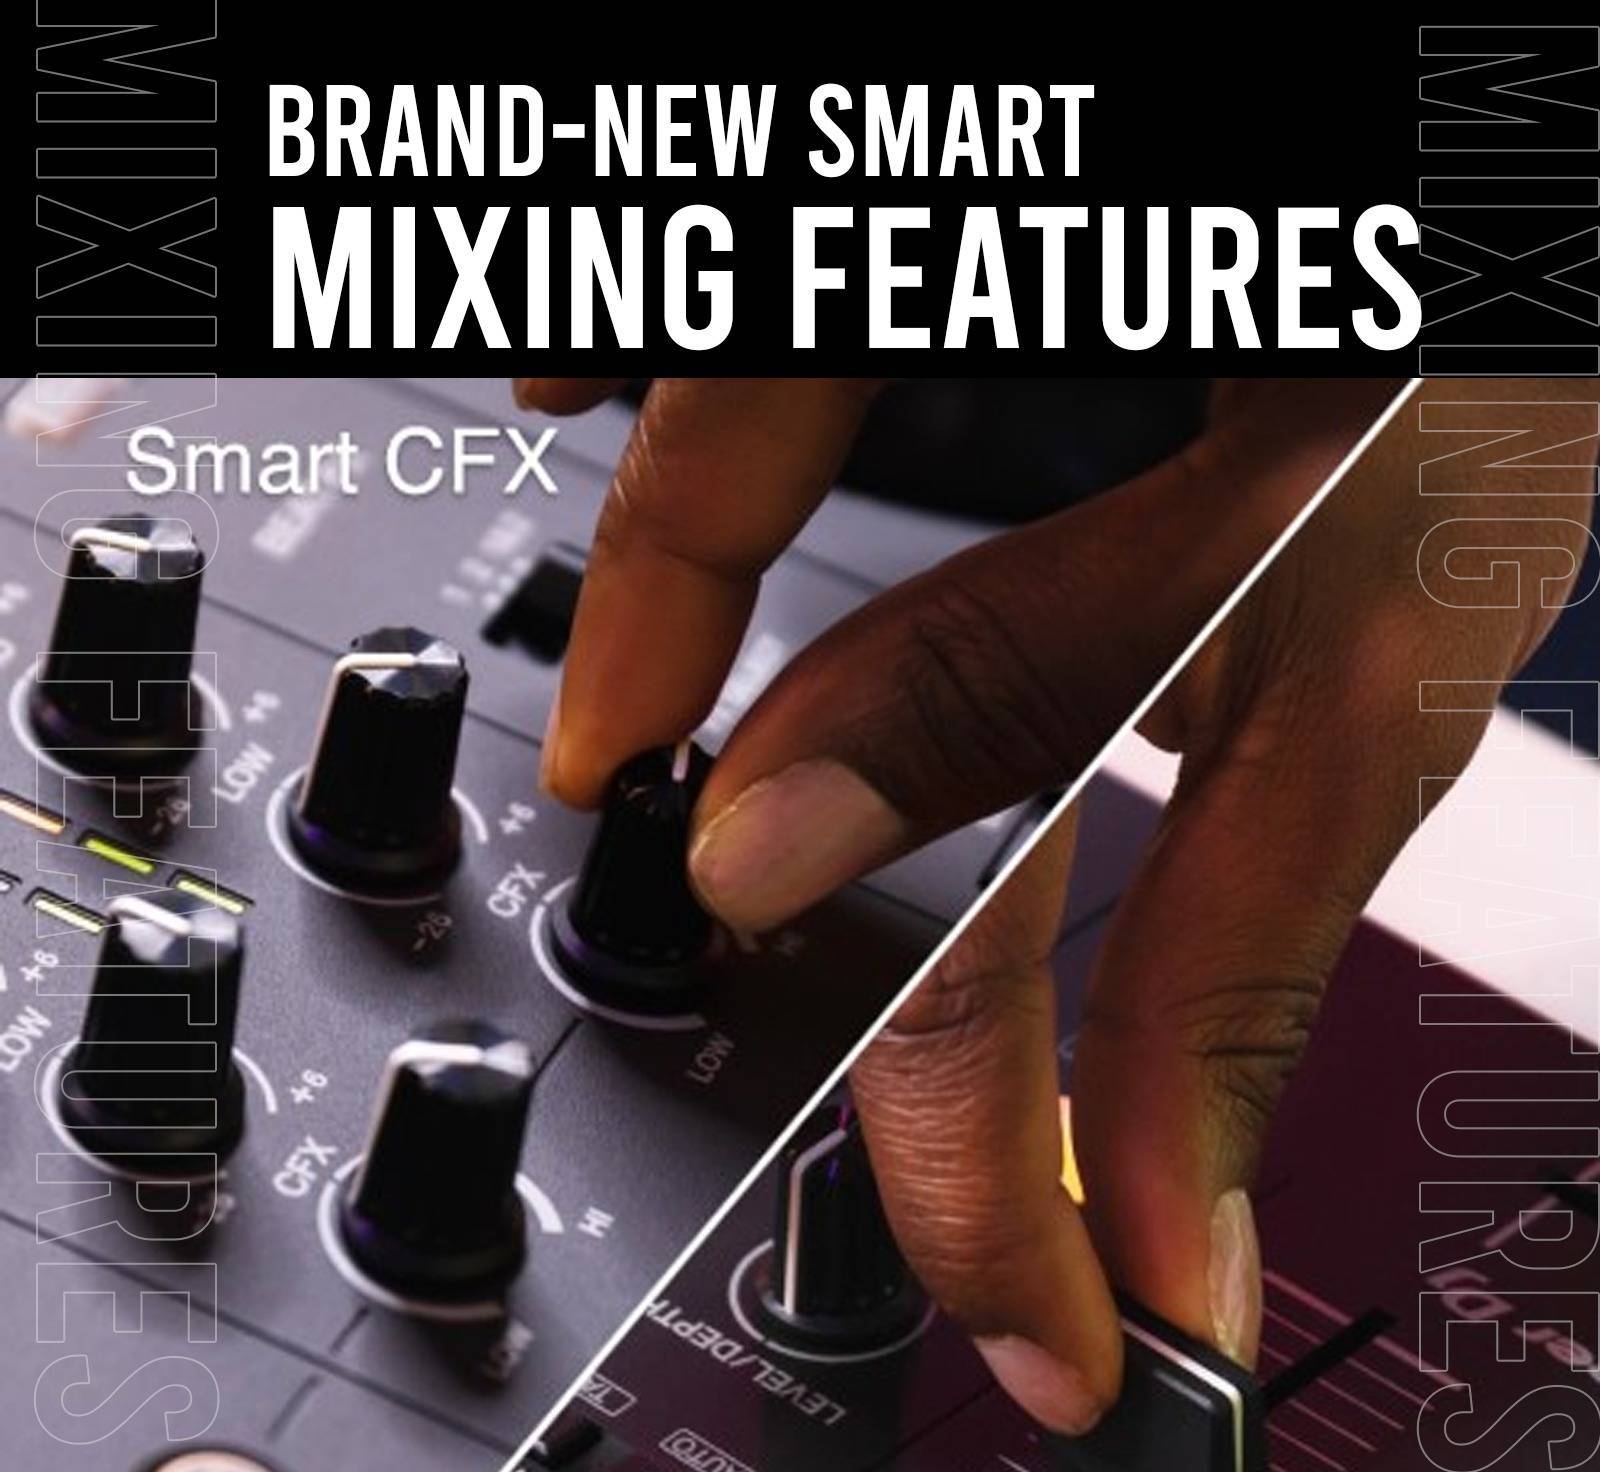 Smart Mixing features